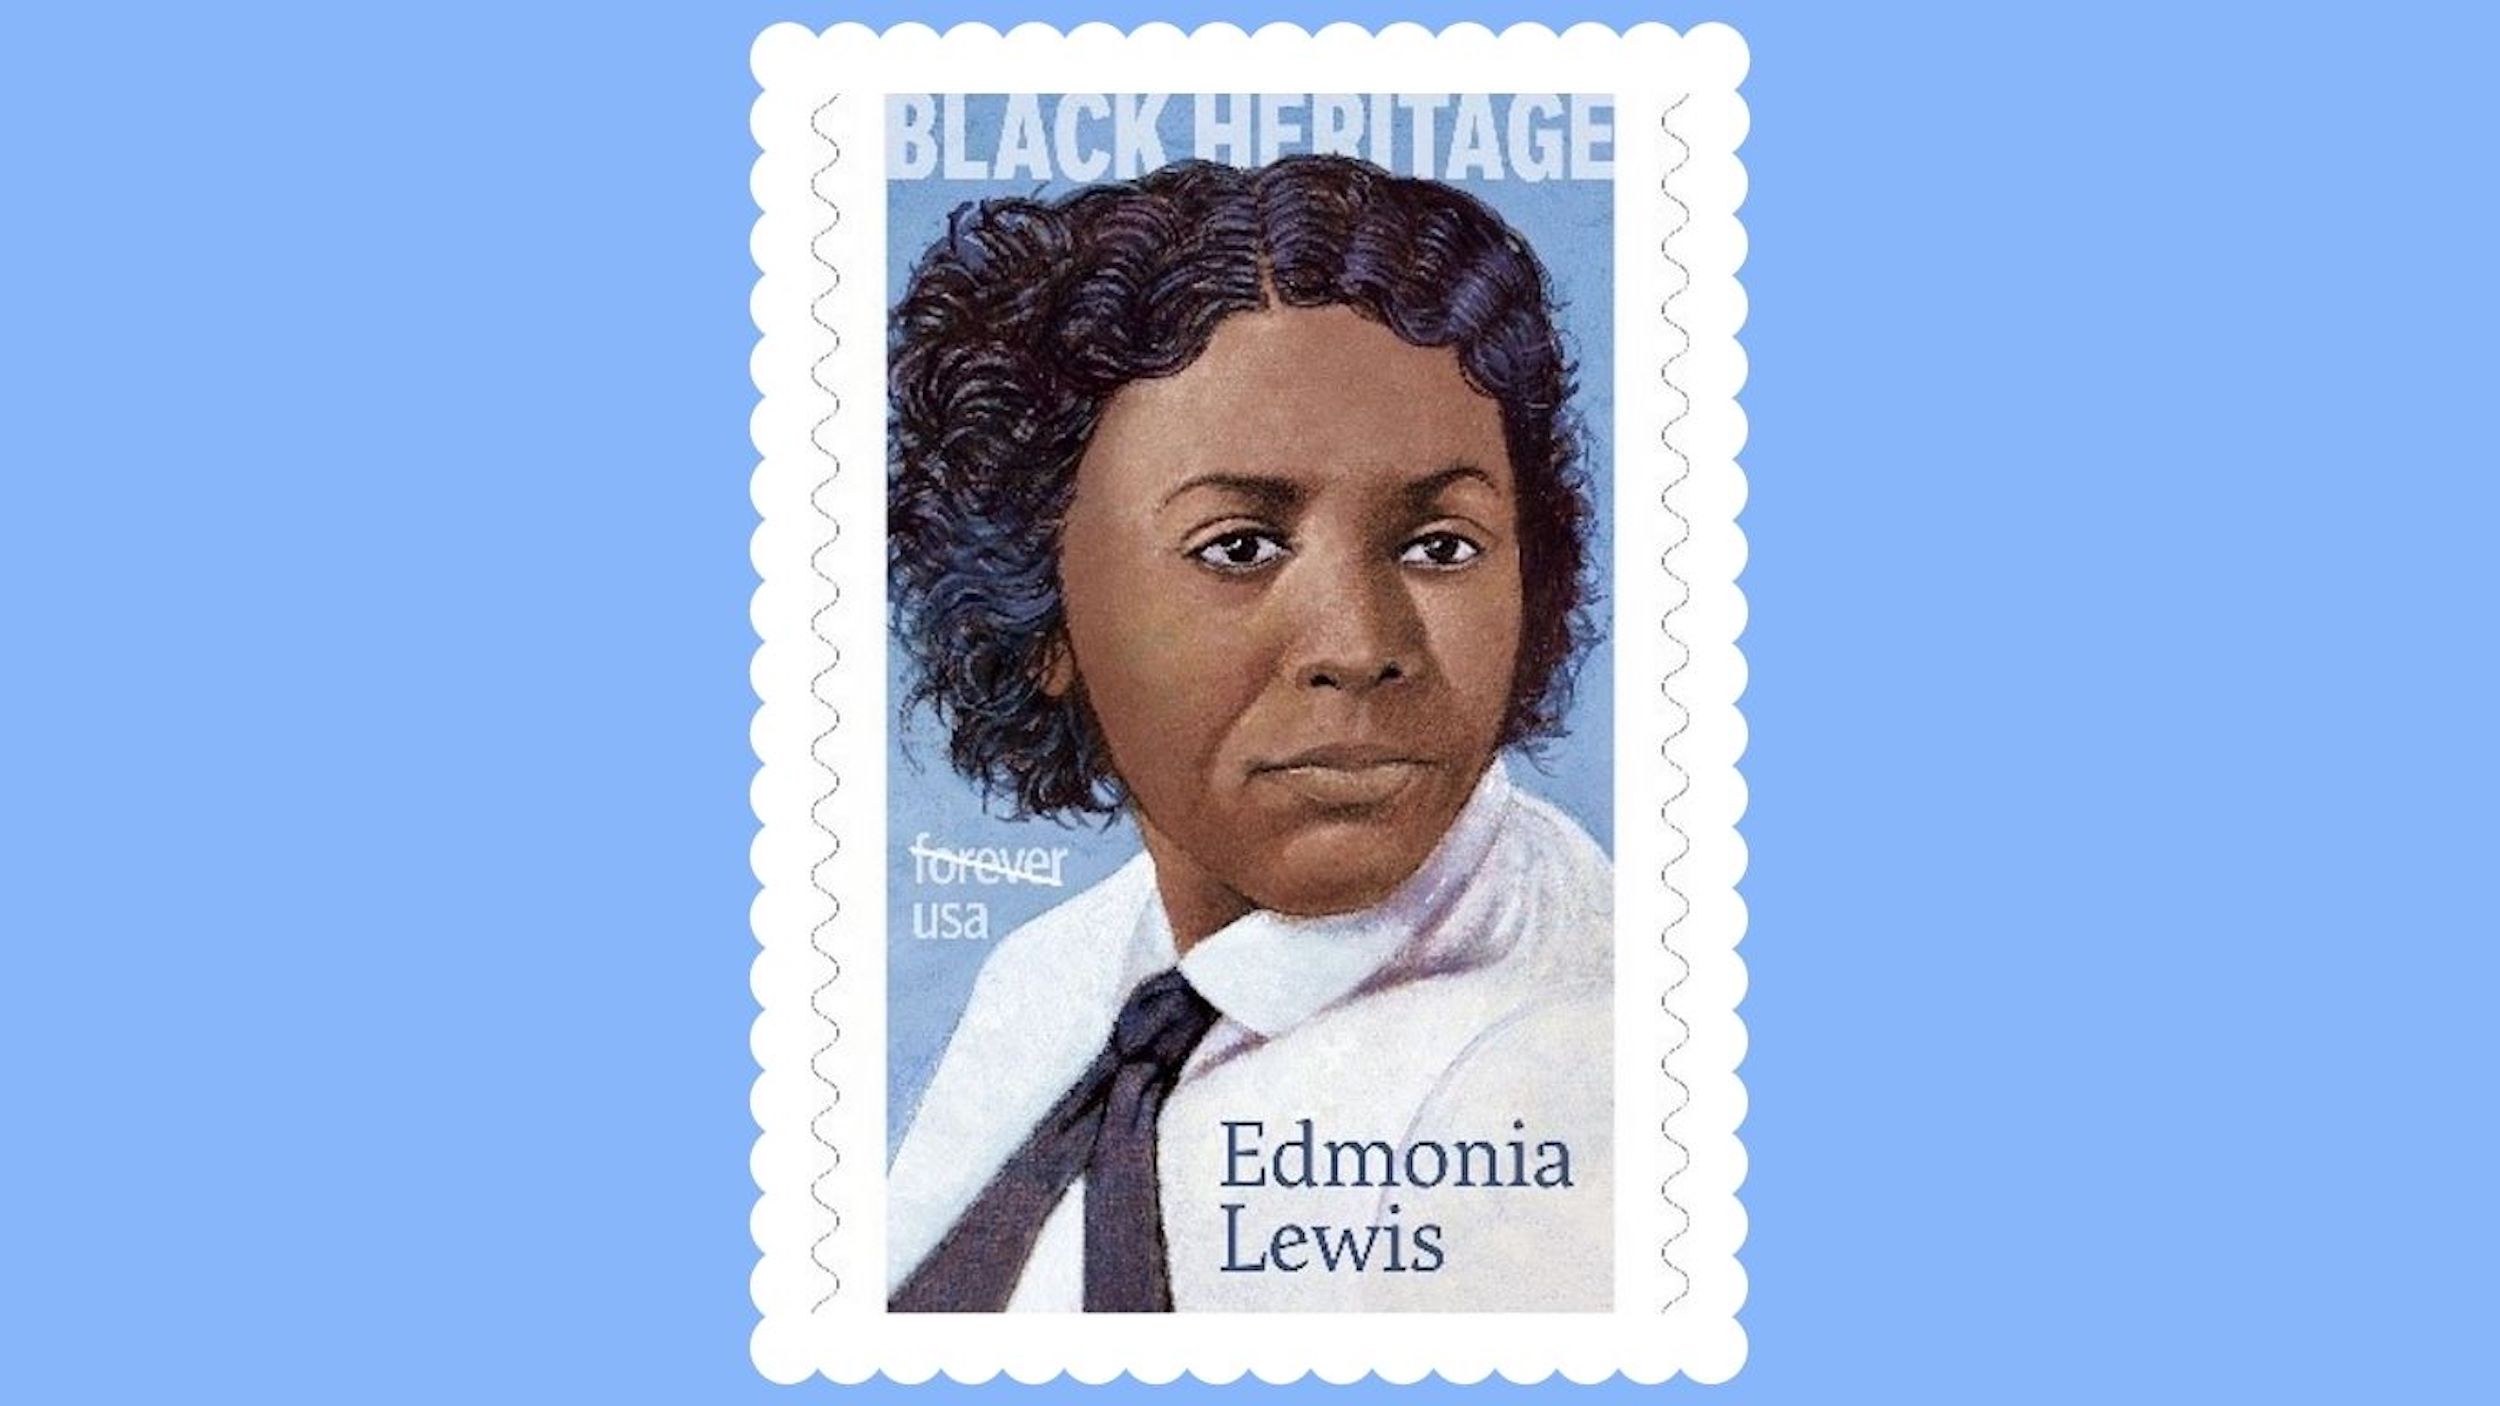 U.S. Postage Stamp Will Honor Edmonia Lewis, a Sculptor Who Broke the Mold, Smart News